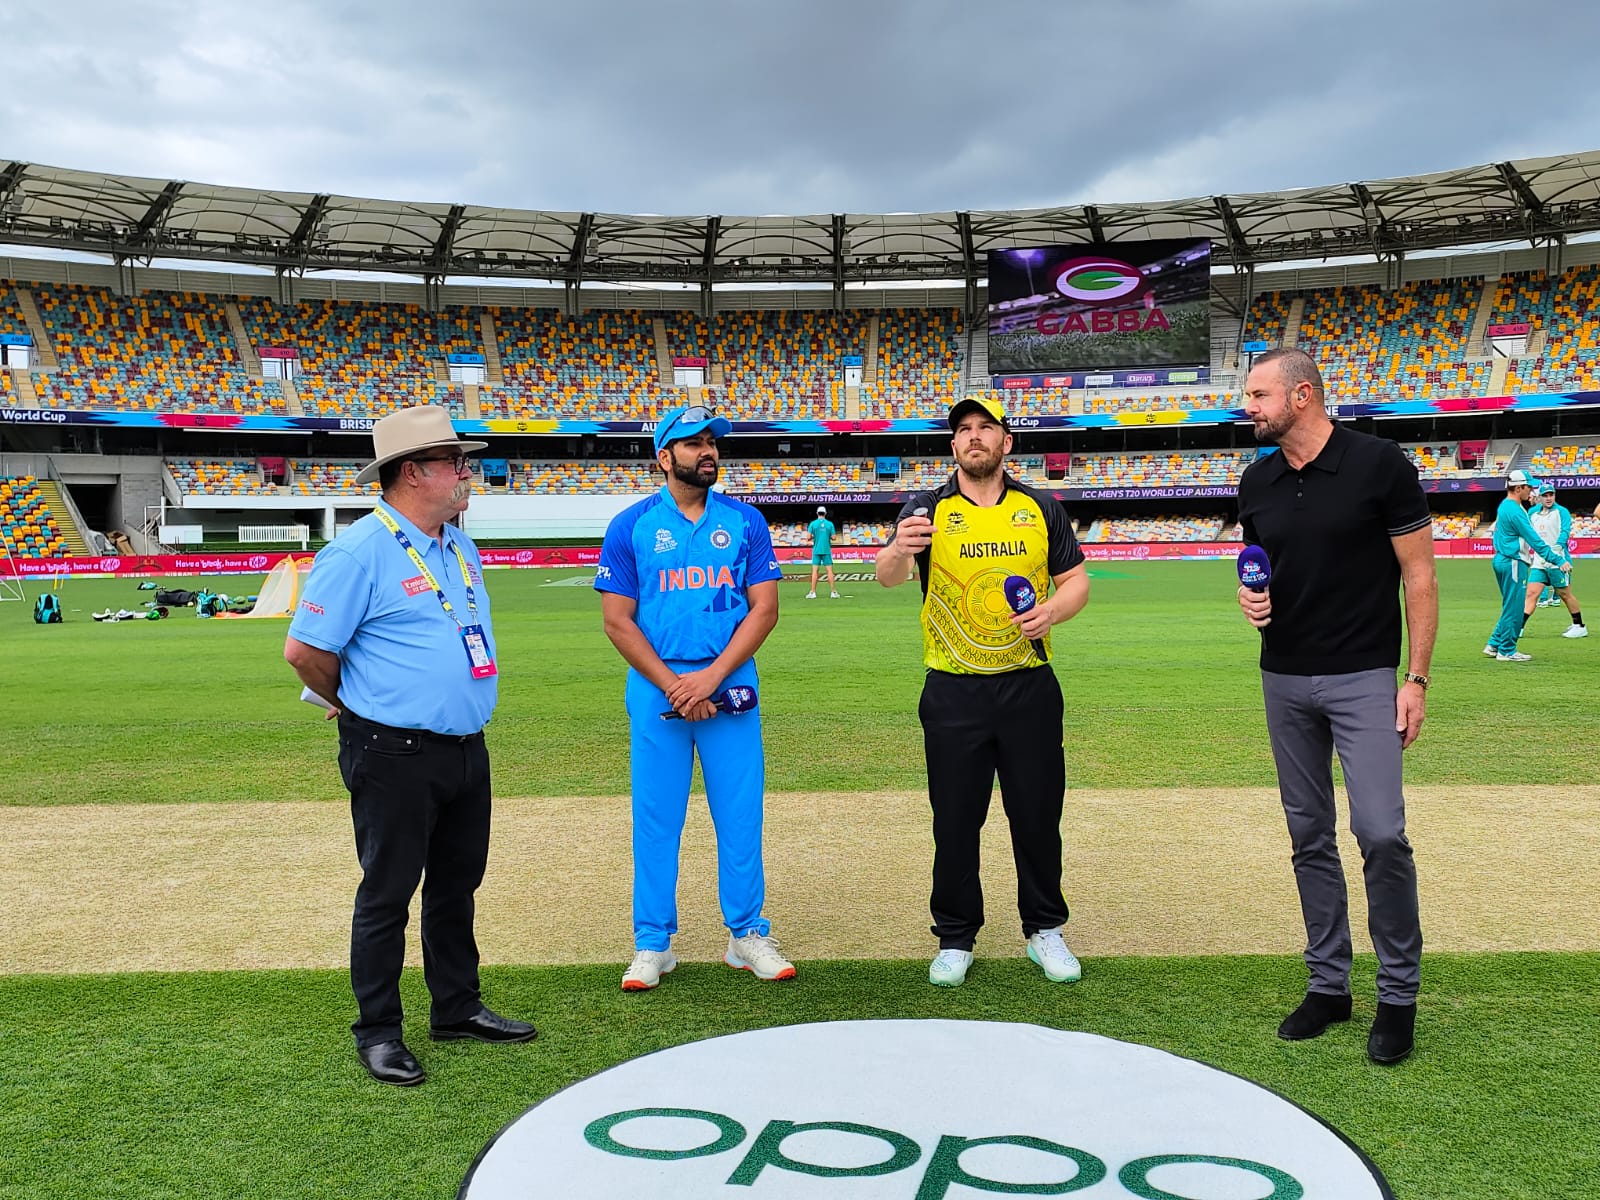 India vs Australia T20 World Cup warm up: Why is the Indian jersey missing 2 stars